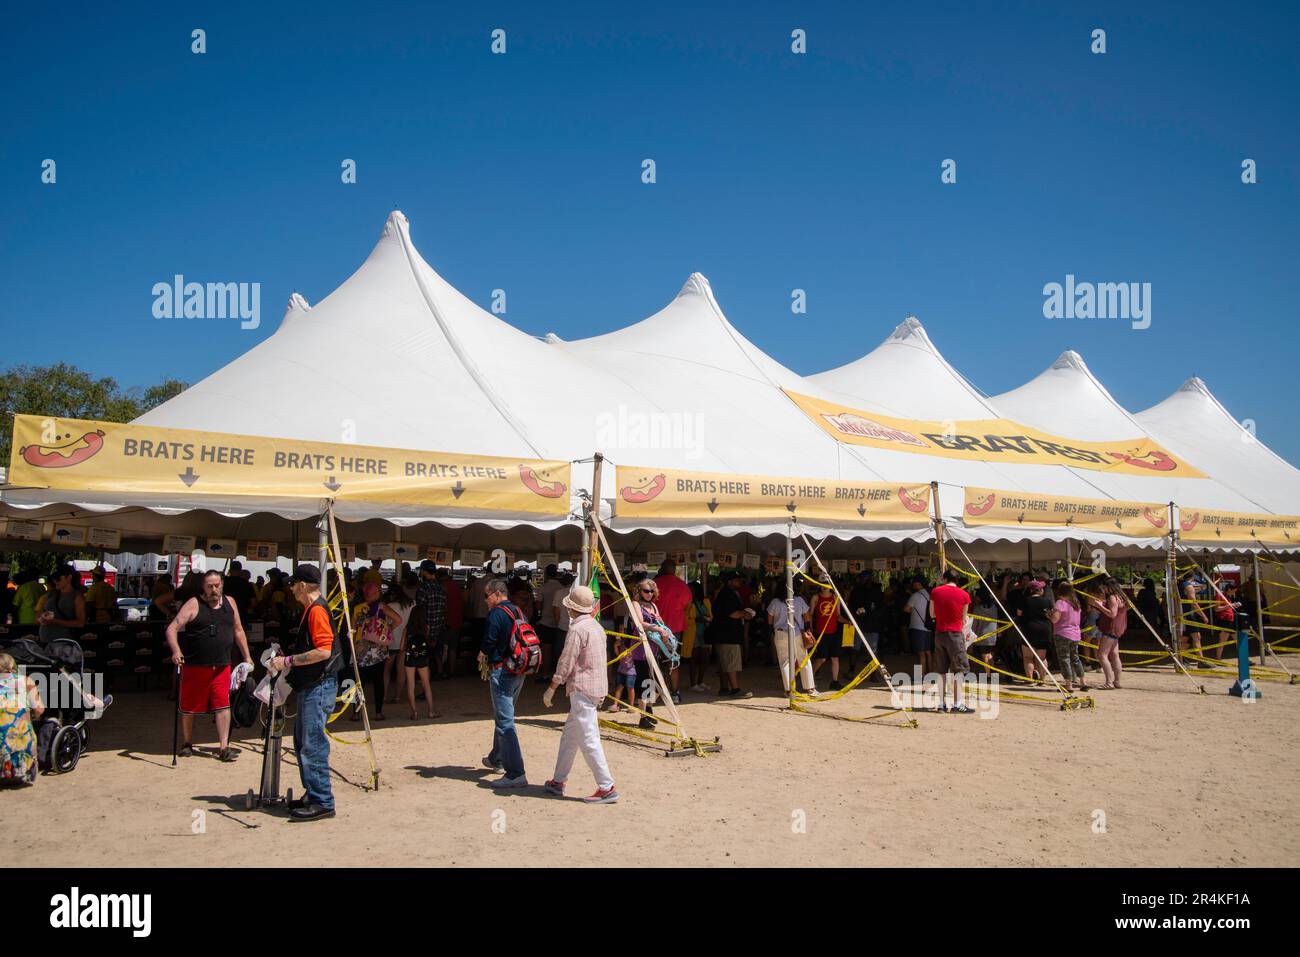 People enjoy the 2023 Bratfest, put on by Metcalfe Grocery, at the Dane County Coliseum, Madison, Wisconsin, USA on a beautiful summer day. Stock Photo